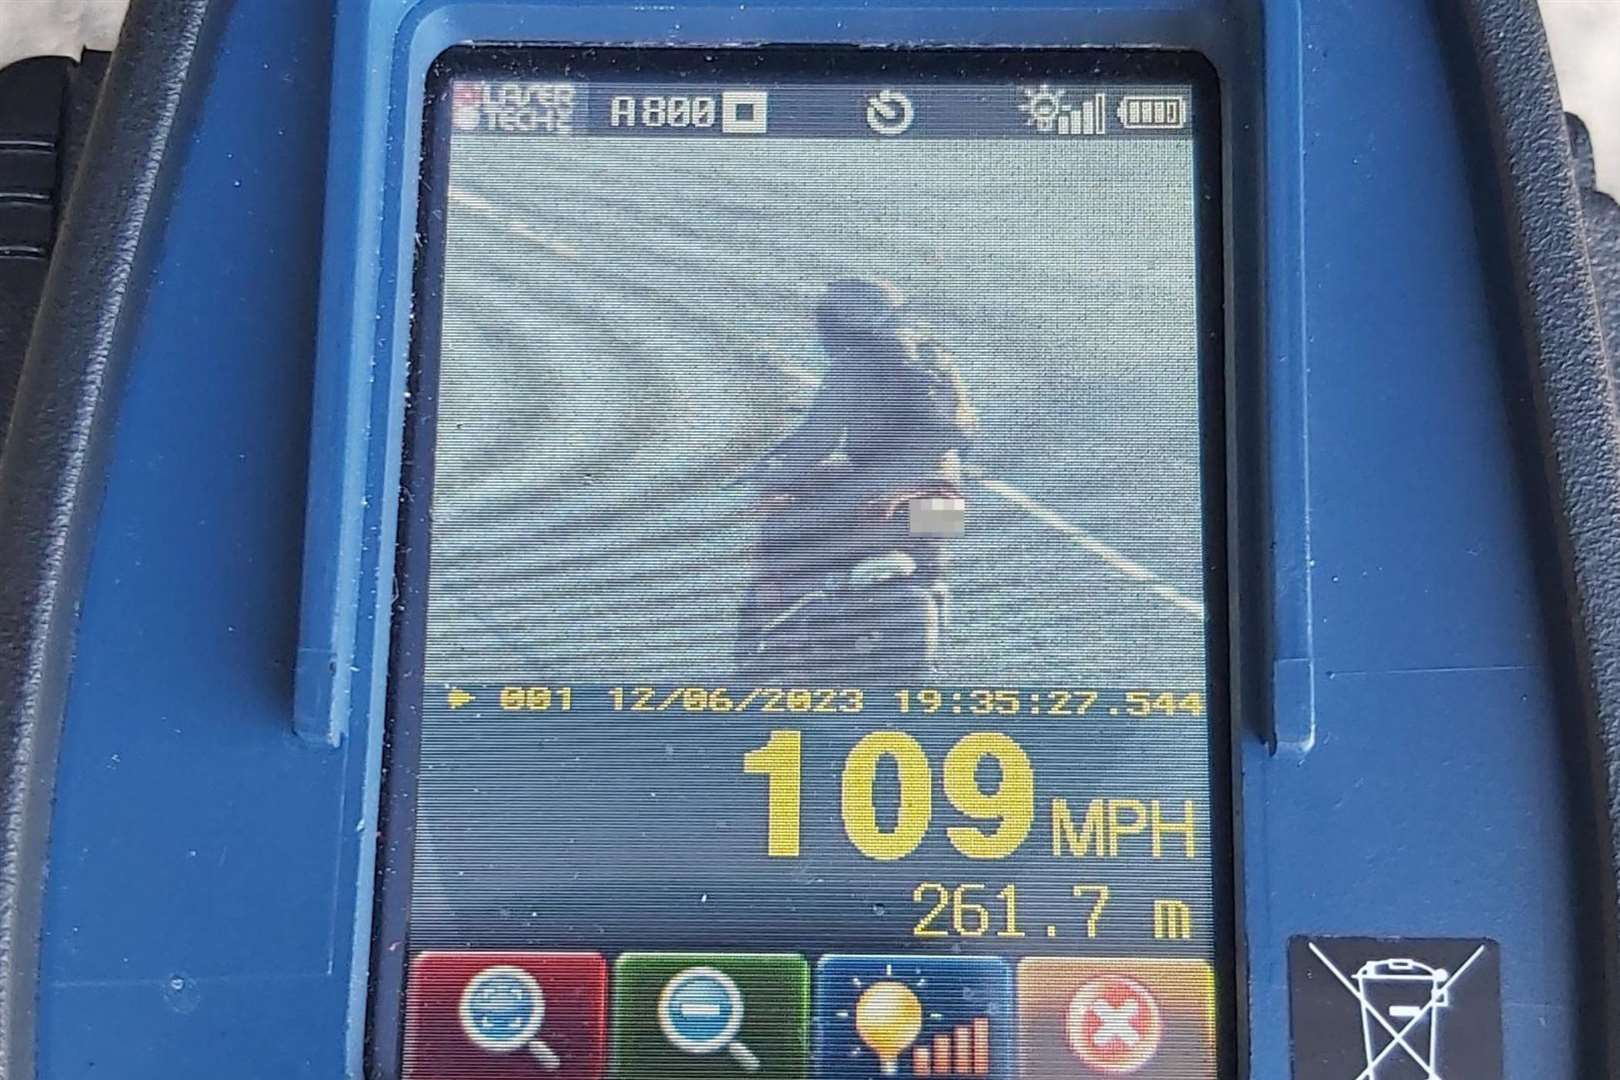 A biker was caught at 109mph on the A249 in Dymchurch, which is a 40mph road. Picture: Kent Police